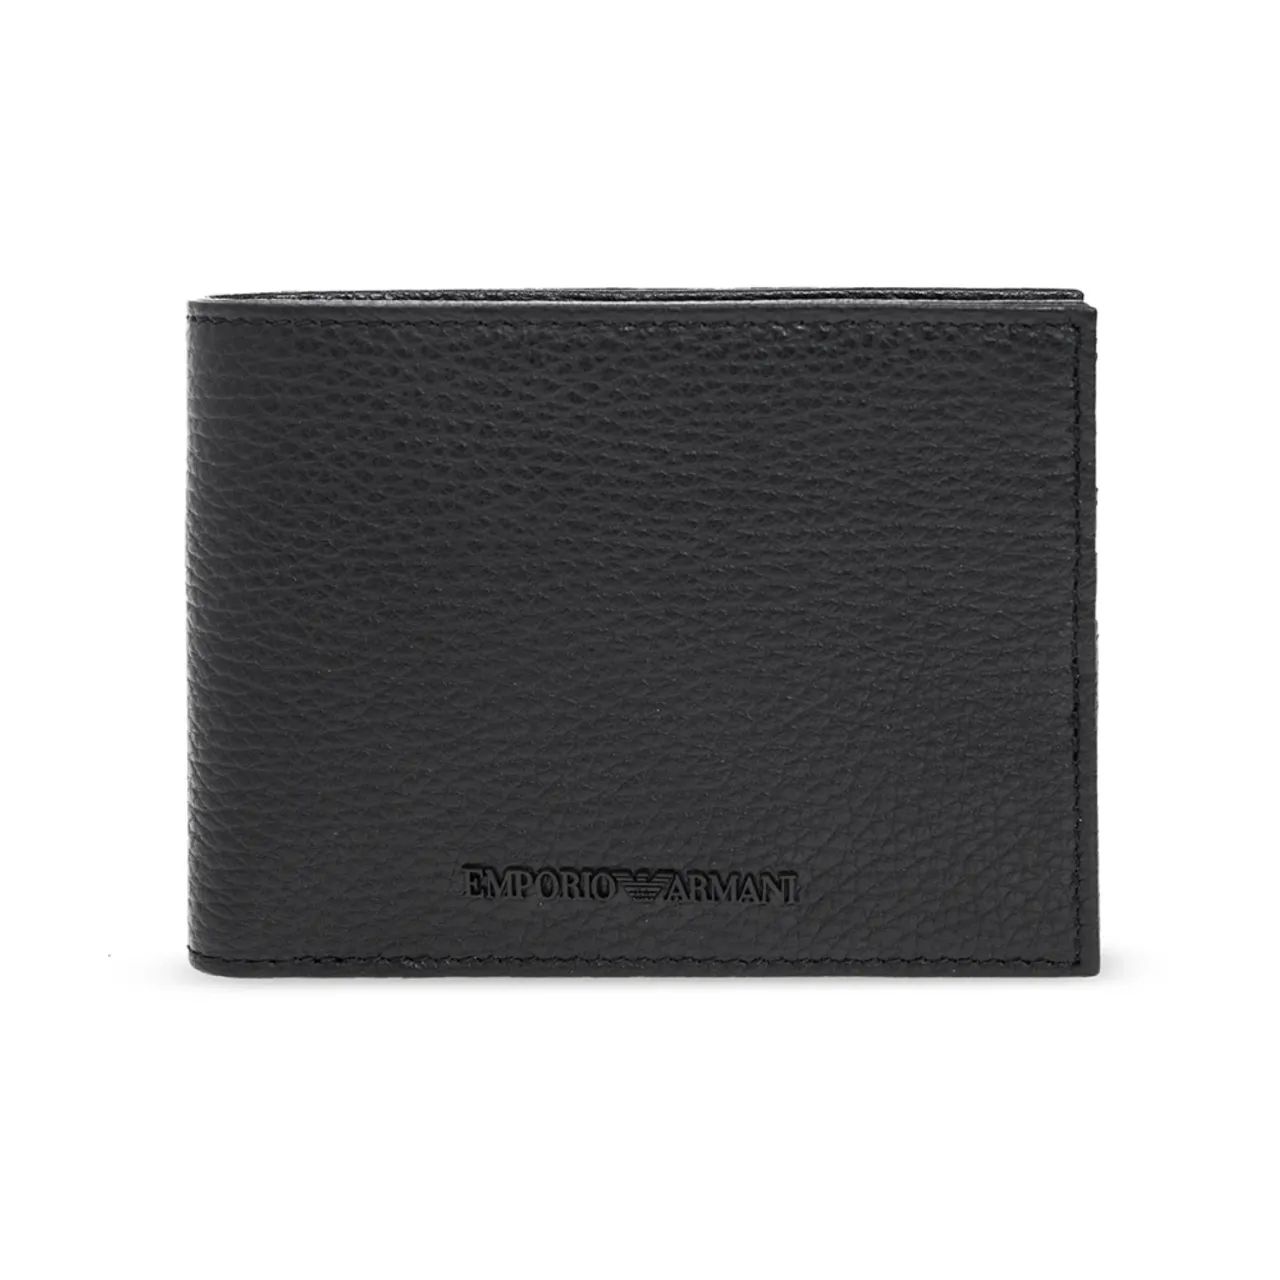 Emporio Armani , Black Leather Wallet and Card Holder Set ,Black male, Sizes: ONE SIZE